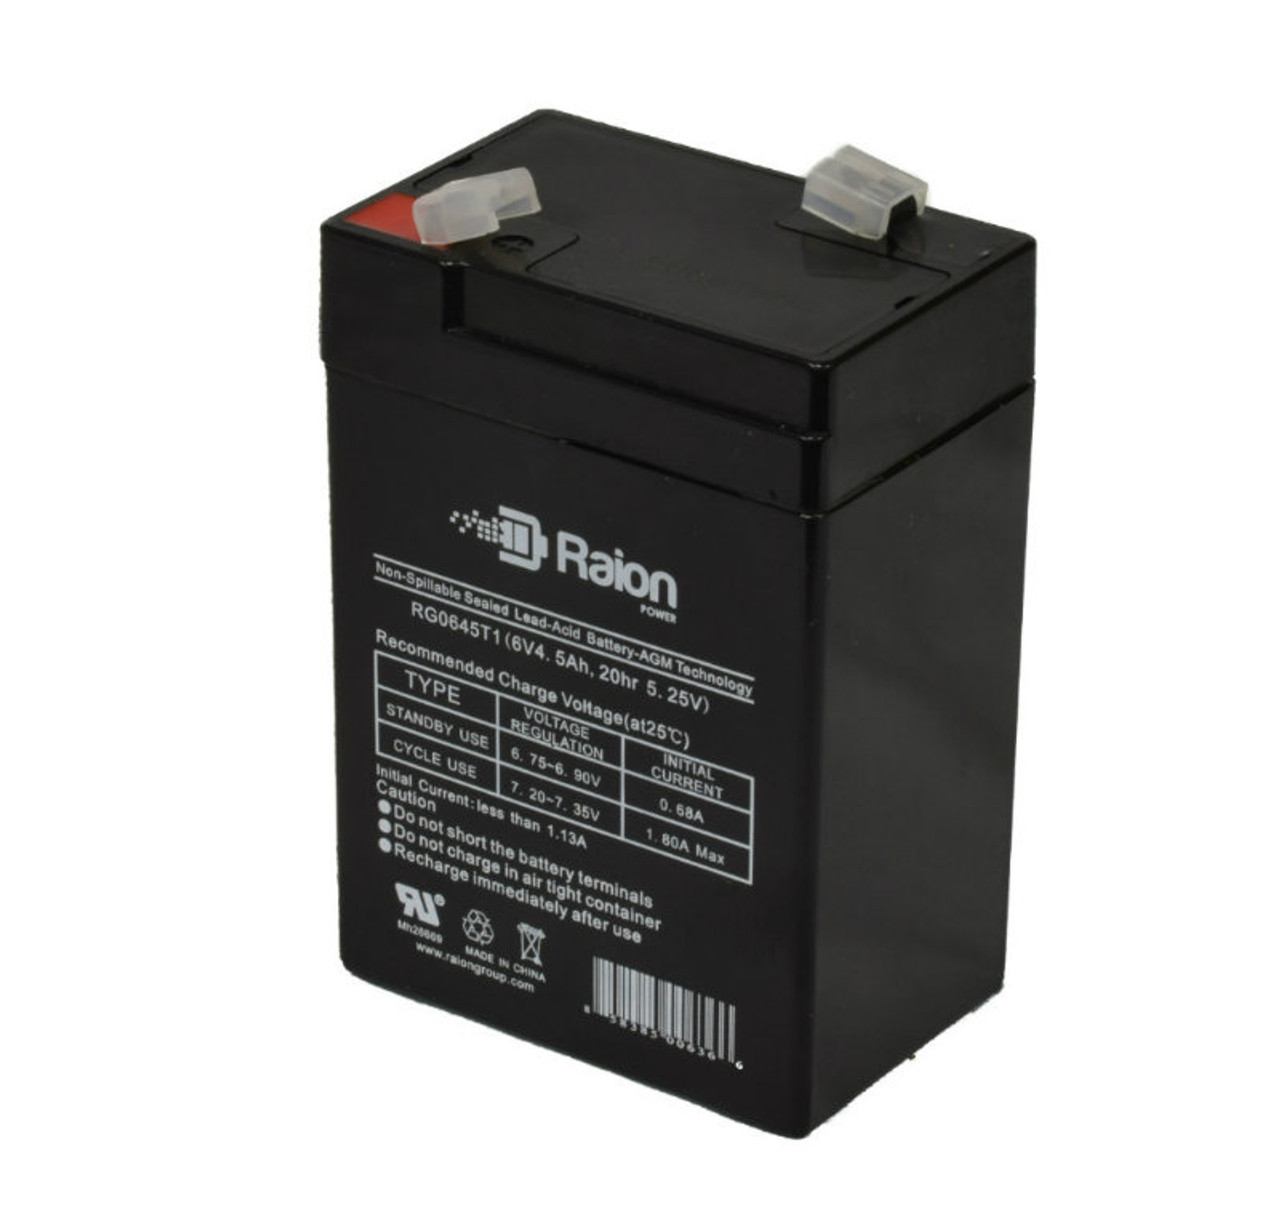 Raion Power RG0645T1 6V 4.5Ah Replacement Battery Cartridge for Sunnyway SW660